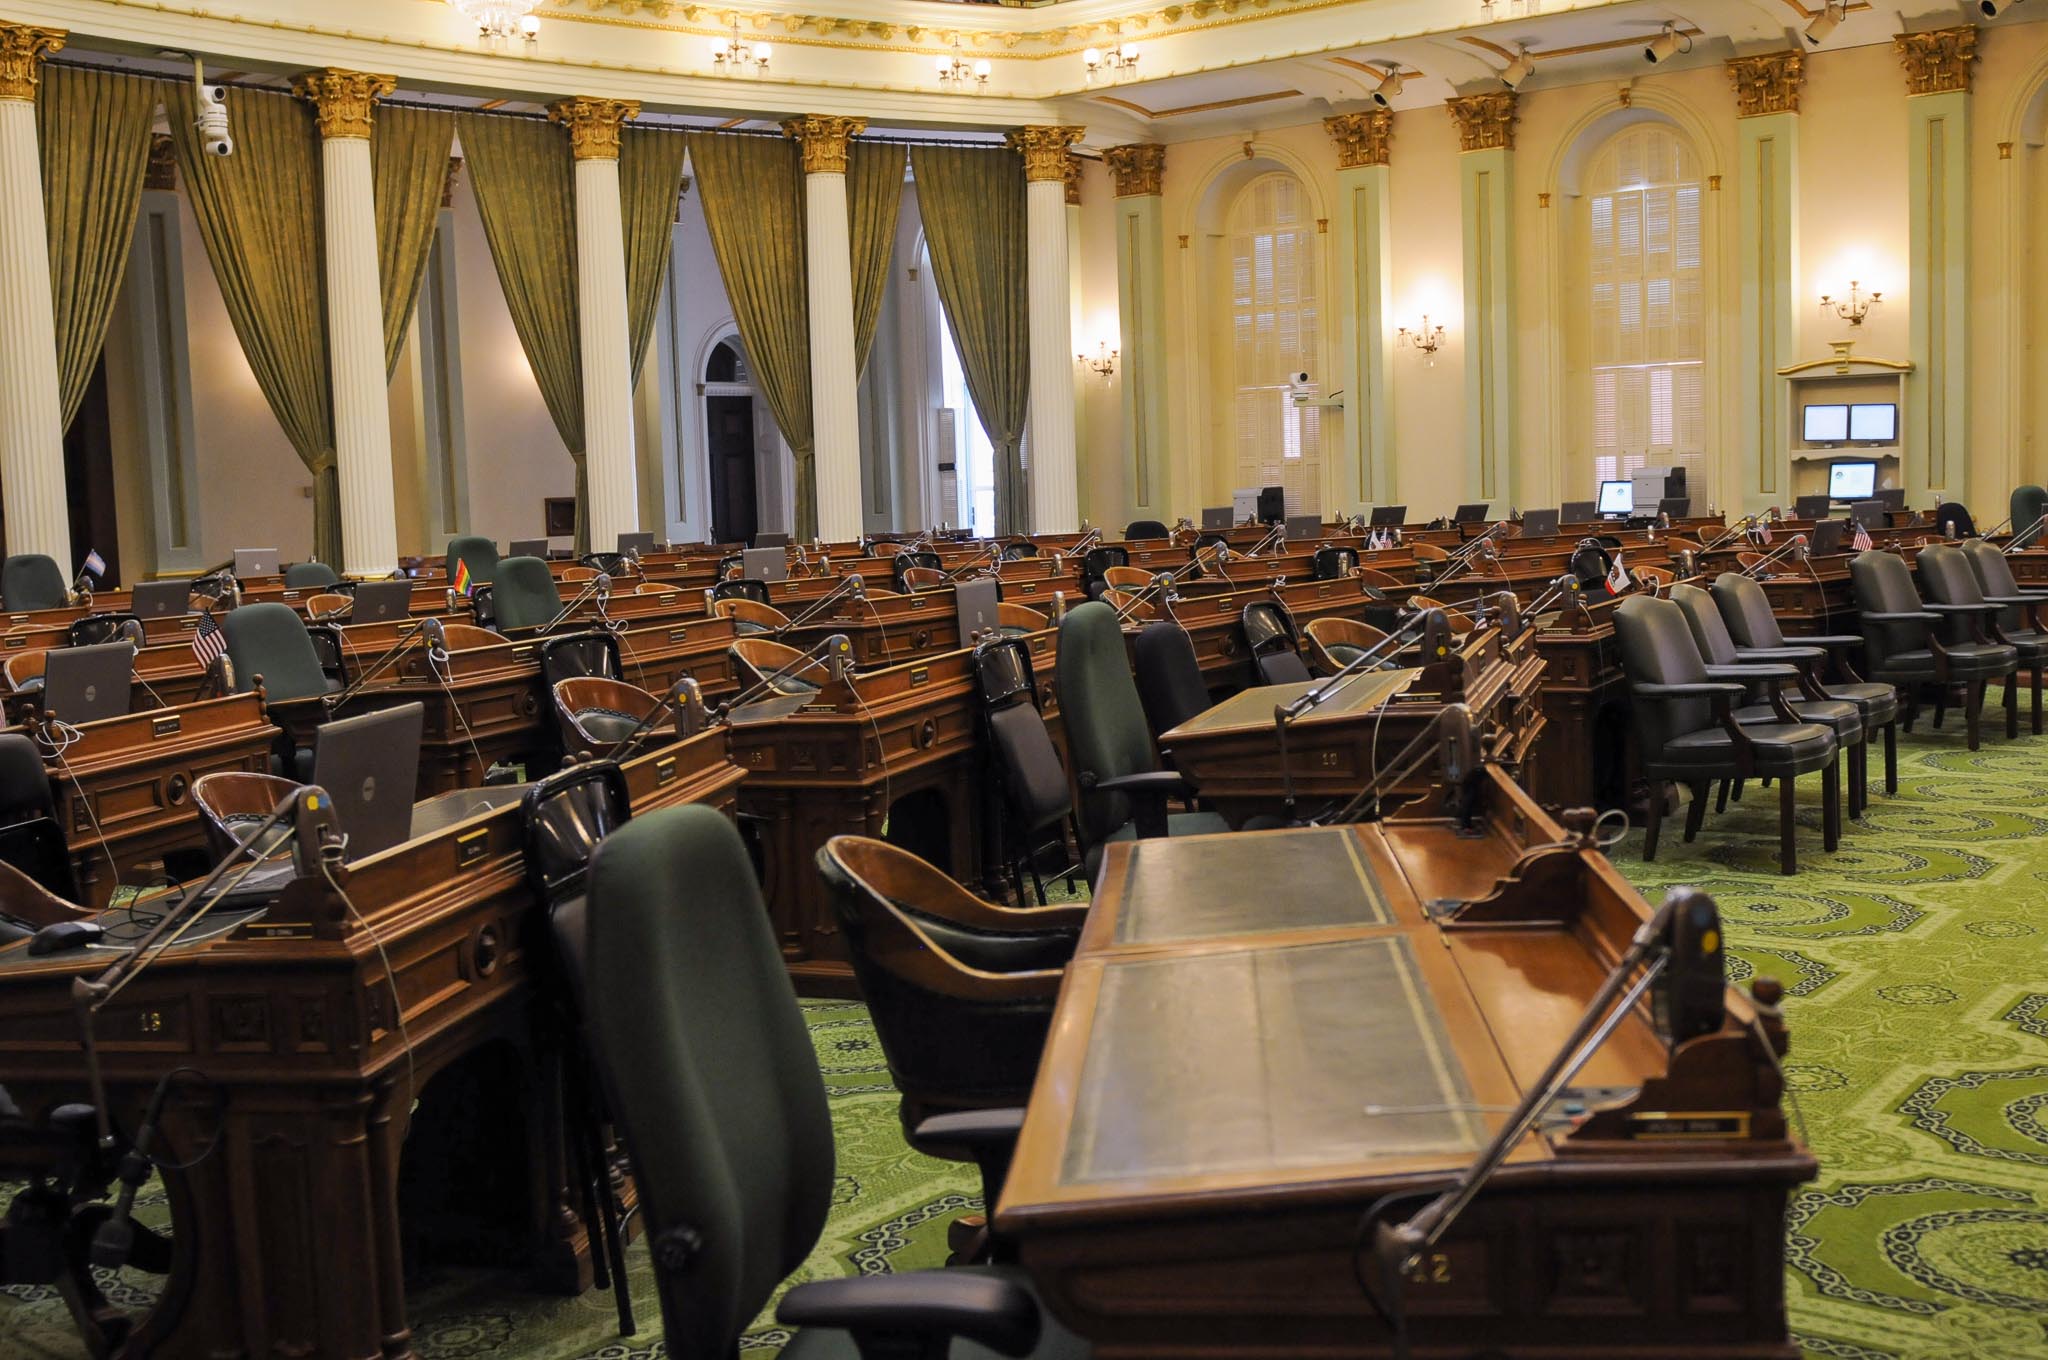 A sea of empty desks inside the California State Assembly